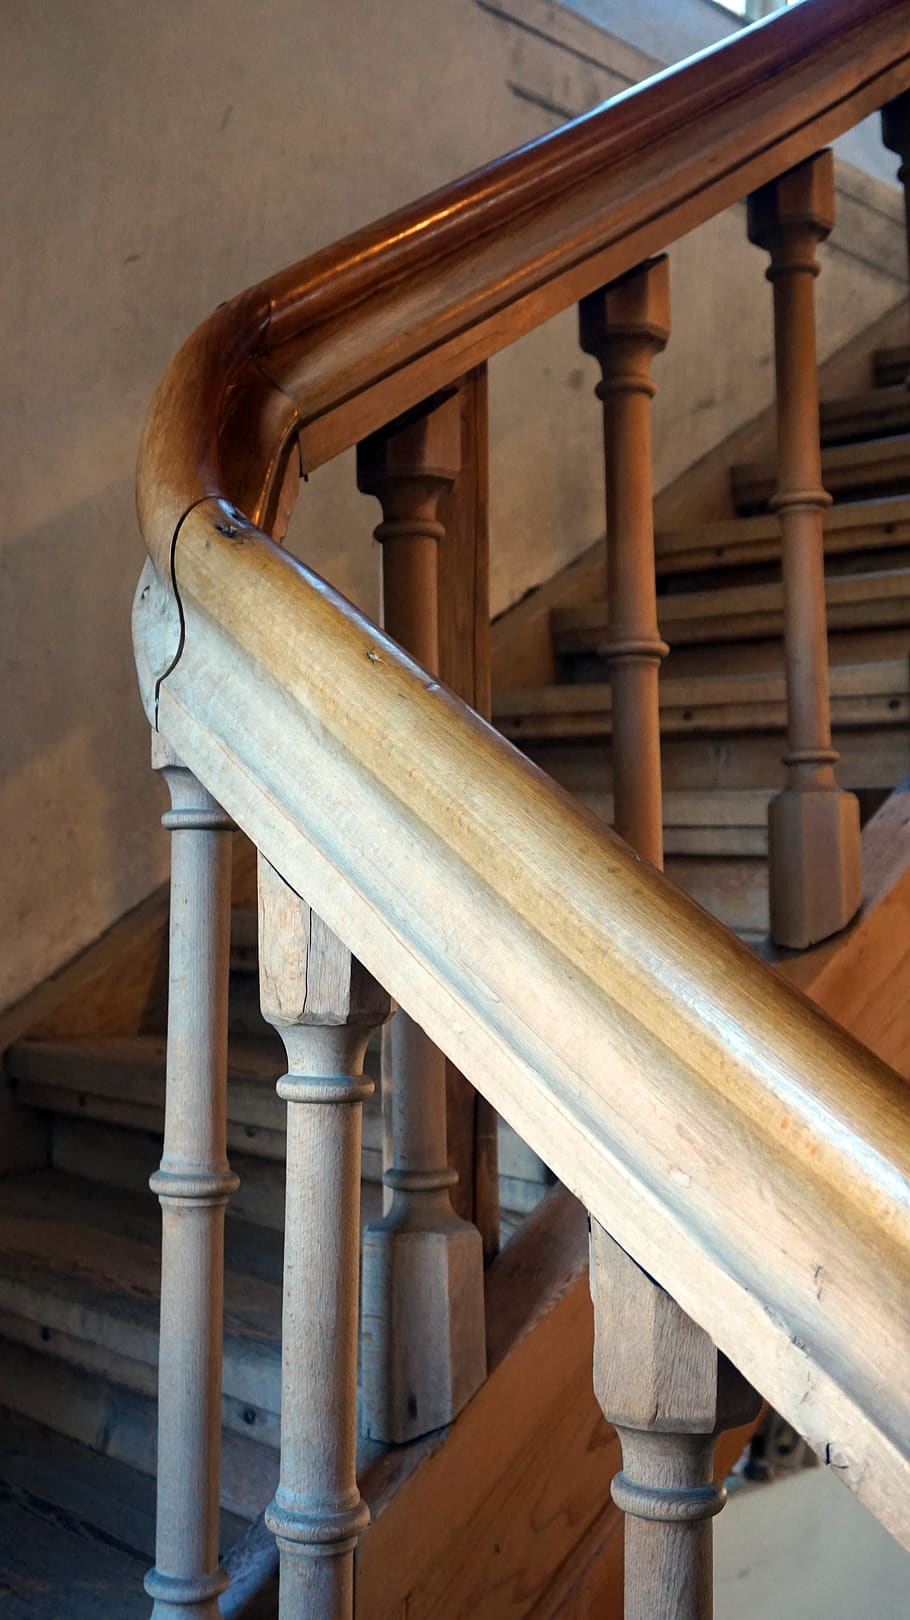 stairs, old, wood, staircase, historically, architecture, wood - material, architectural column, built structure, railing